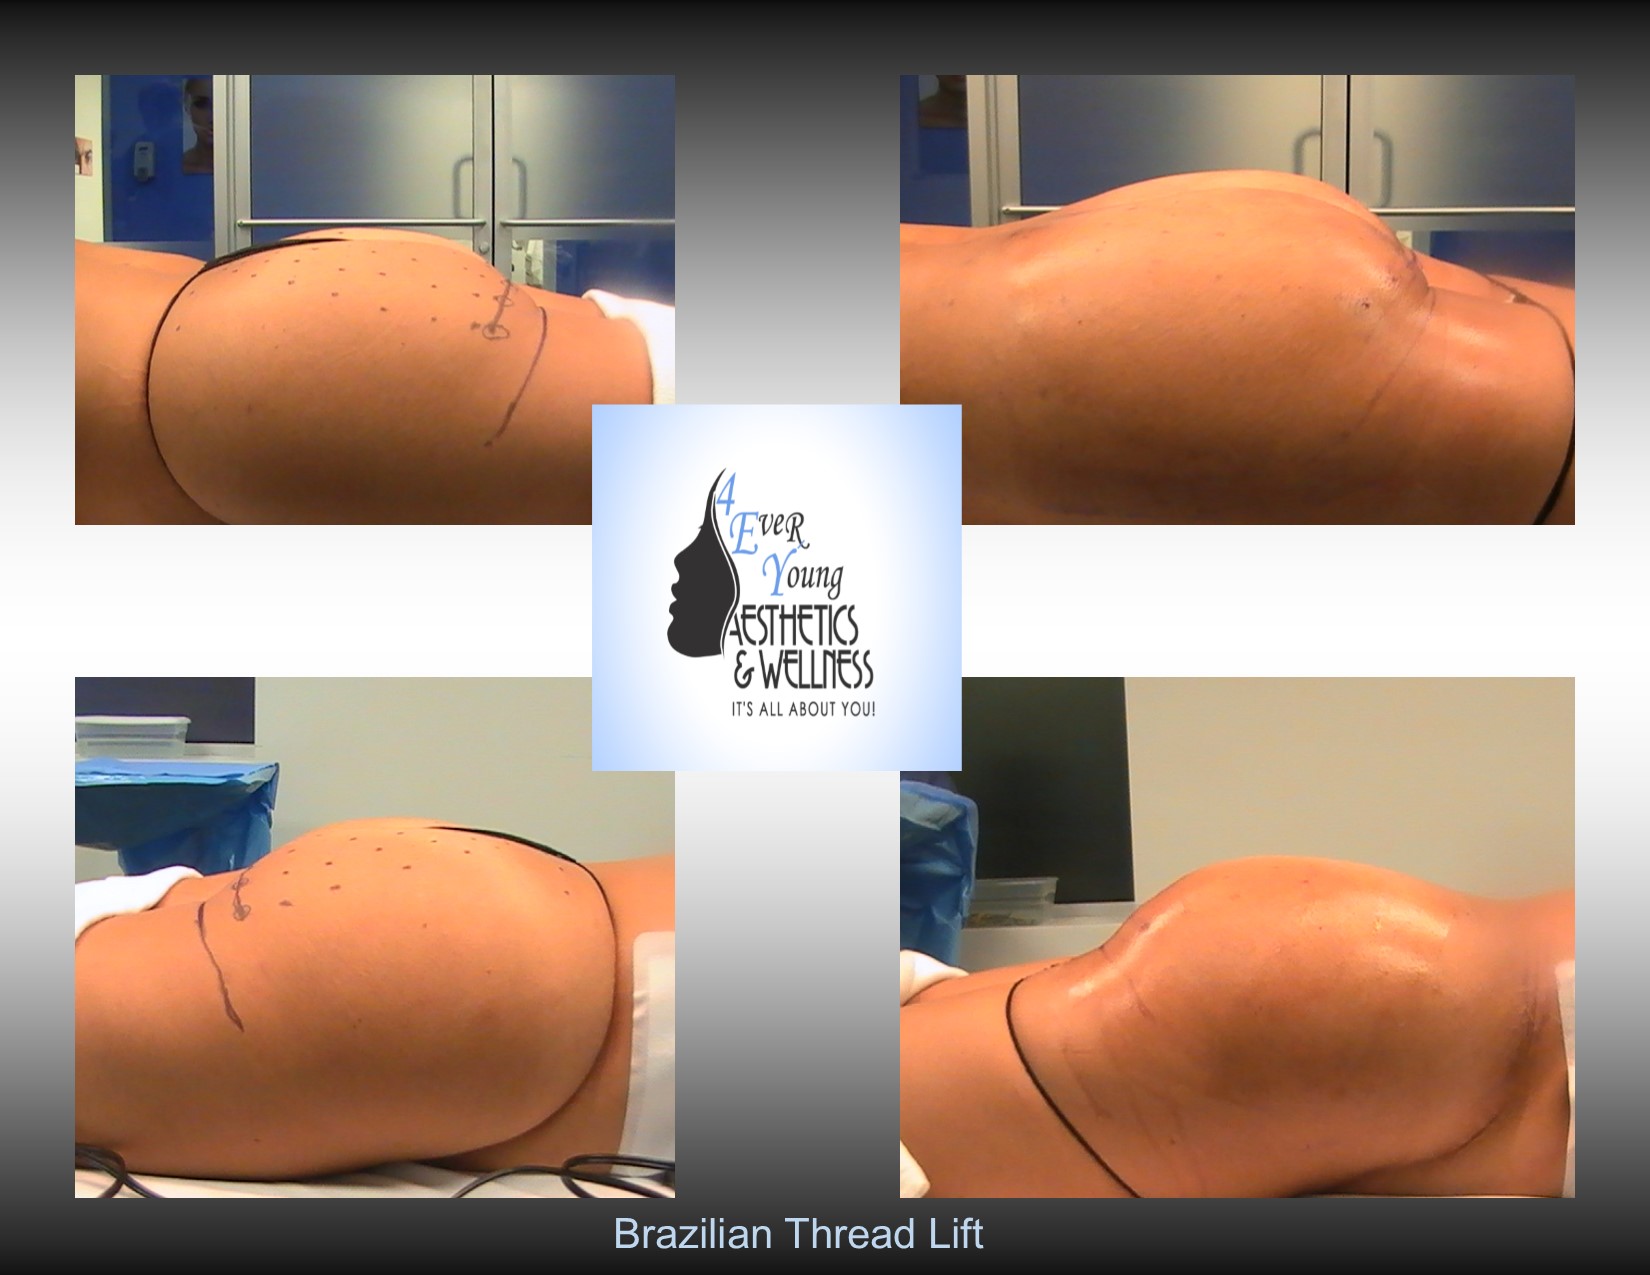 Brazilian Butt Lift, with Threads, Brazilian Butt Lift (BBL) utilizes liposuction plastic surgery performed by our liposuction surgeon. Liposuction is performed using tumescent anesthesia and traditional liposuction plastic surgery.  We are experts in laser liposuction (smartlipo), vaser liposuction and fat transfer, also known as fat grafting.  Brazilian butt lift atlanta has been popularized by Dr. Curves and others like therealdrmiami of snapchat fame have made Brazilian butt lifts extremely popular in recent years. Our autologous fat transfer is second to none and we utilize Platelet-Rich Plasma (PRP) which helps stabilize the fat transfer faster by promoting blood vessels to grow into the fat grafting. Most people think that a Brazilian butt lift (BBL) is a plastic surgery procedure but instead it is a cosmetic surgery procedure strictly performed for enhancement of the buttock area to transform your butt into the big Brazilian butt and replicate the popular Brazilian ass that Brazilian butt women have been getting Brazilian butt lifts to have for years.  As part of our mommy makeover packages you can combine a Brazilian ass with a tummy tuck and/or breast augmentation with a mastopexy, which is more commonly associated with a mommy makeover.